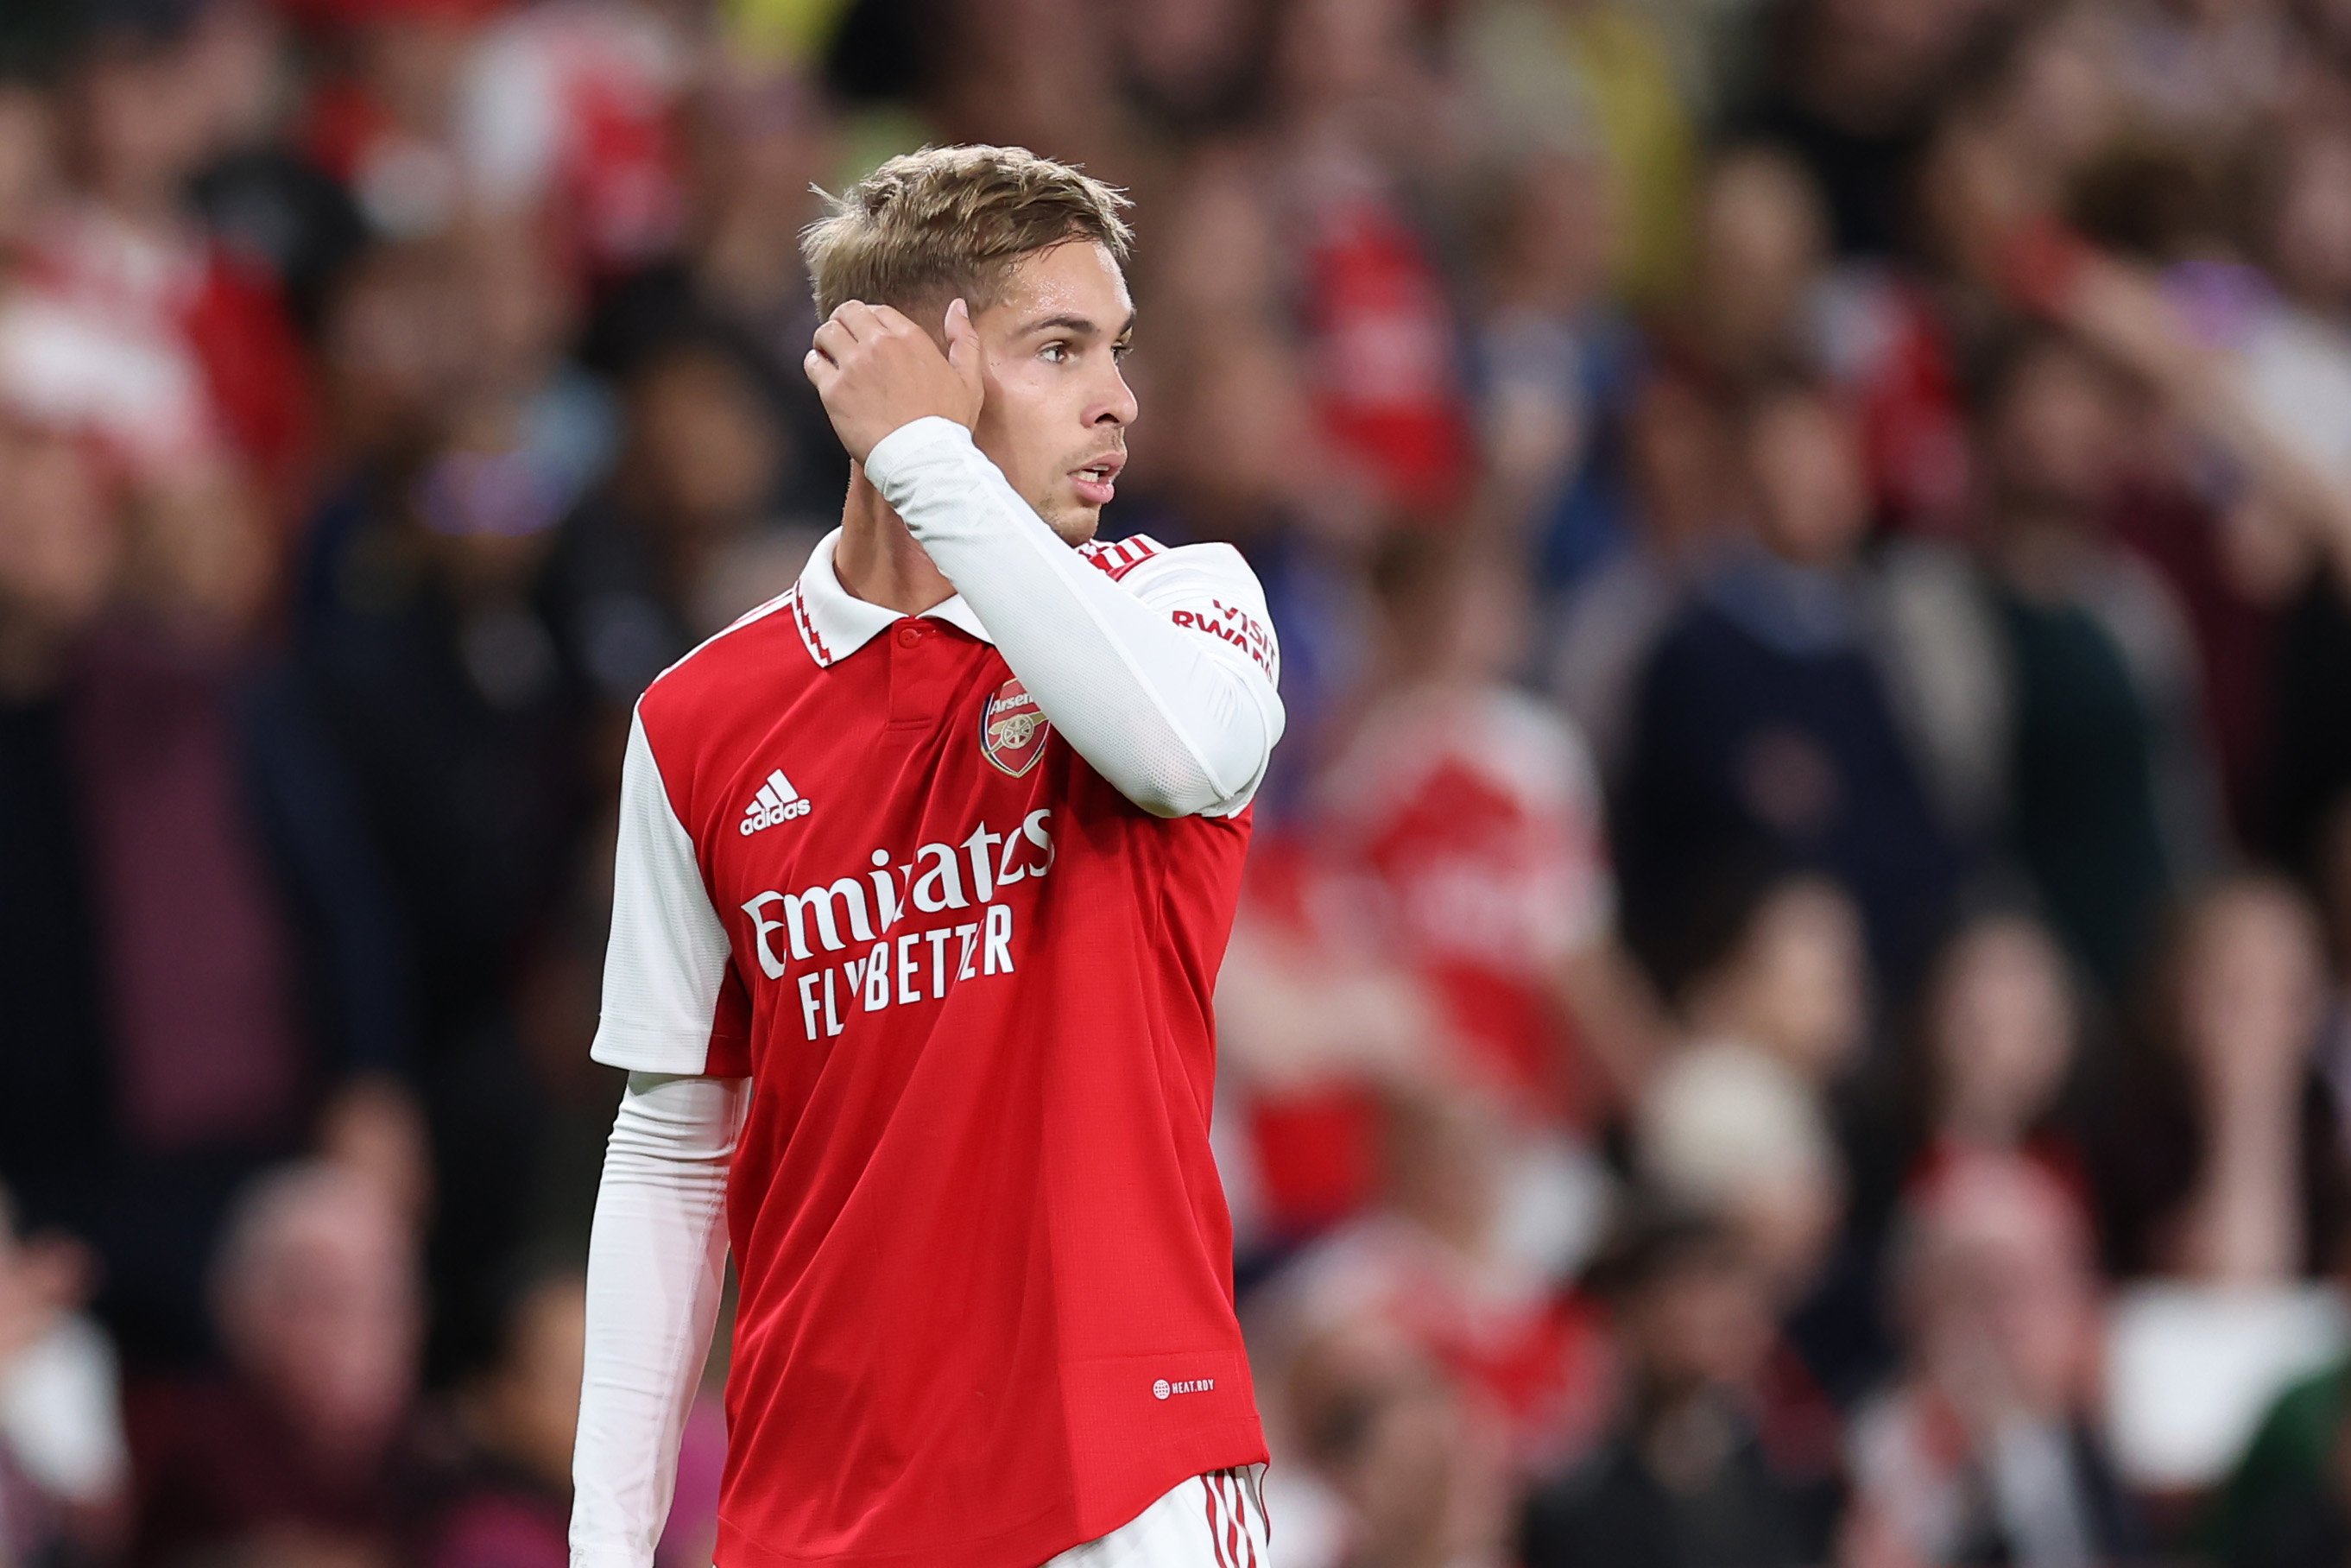 Has Emile Smith Rowe has lost favour with Arsenal boss Mikel Arteta - and what comes next for ESR